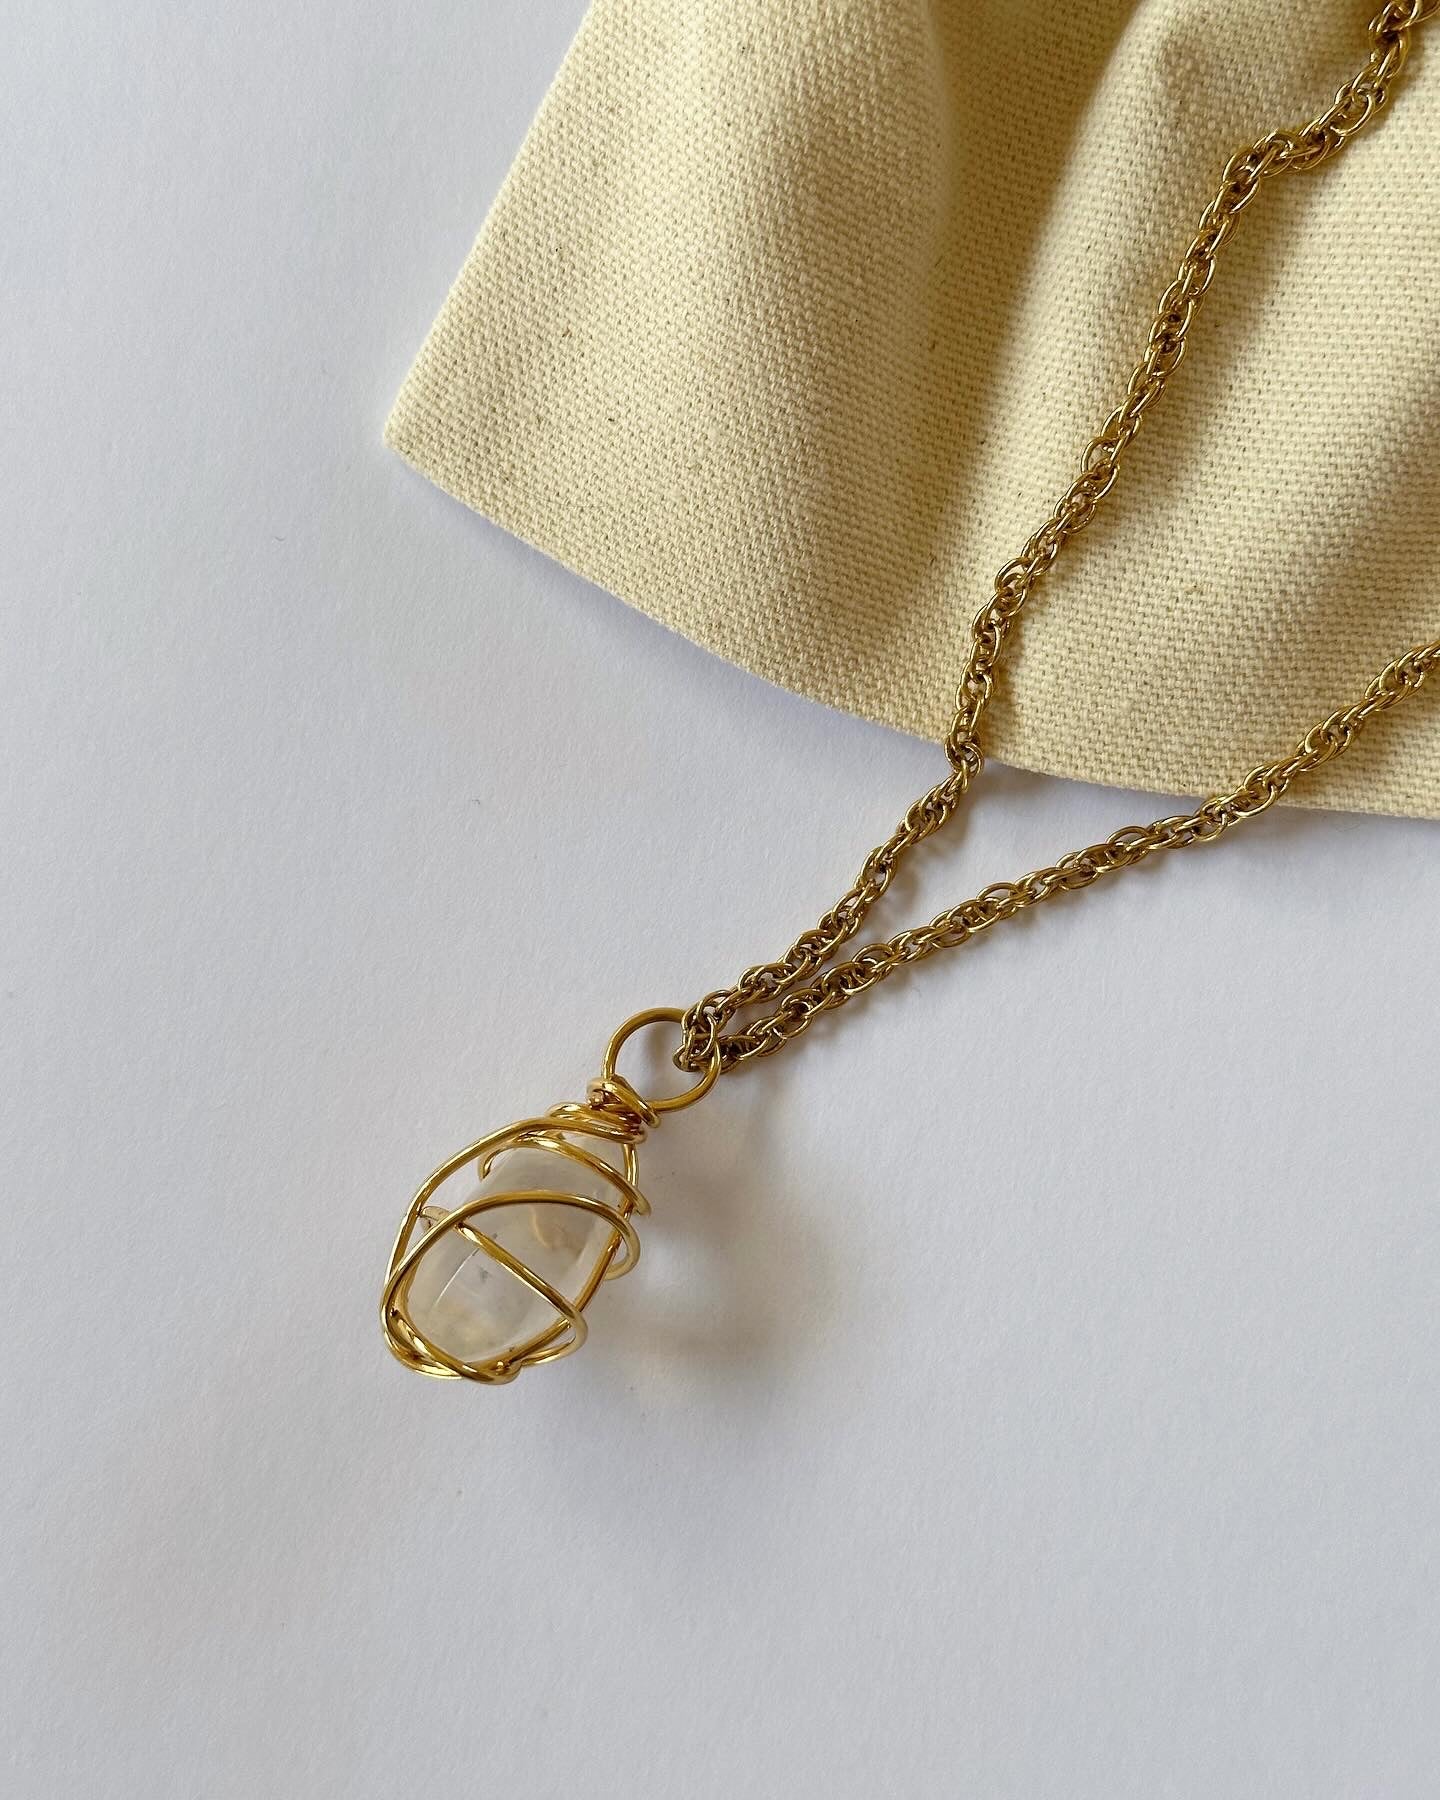 Vintage long gold-tone necklace with natural stone pendant by Avon